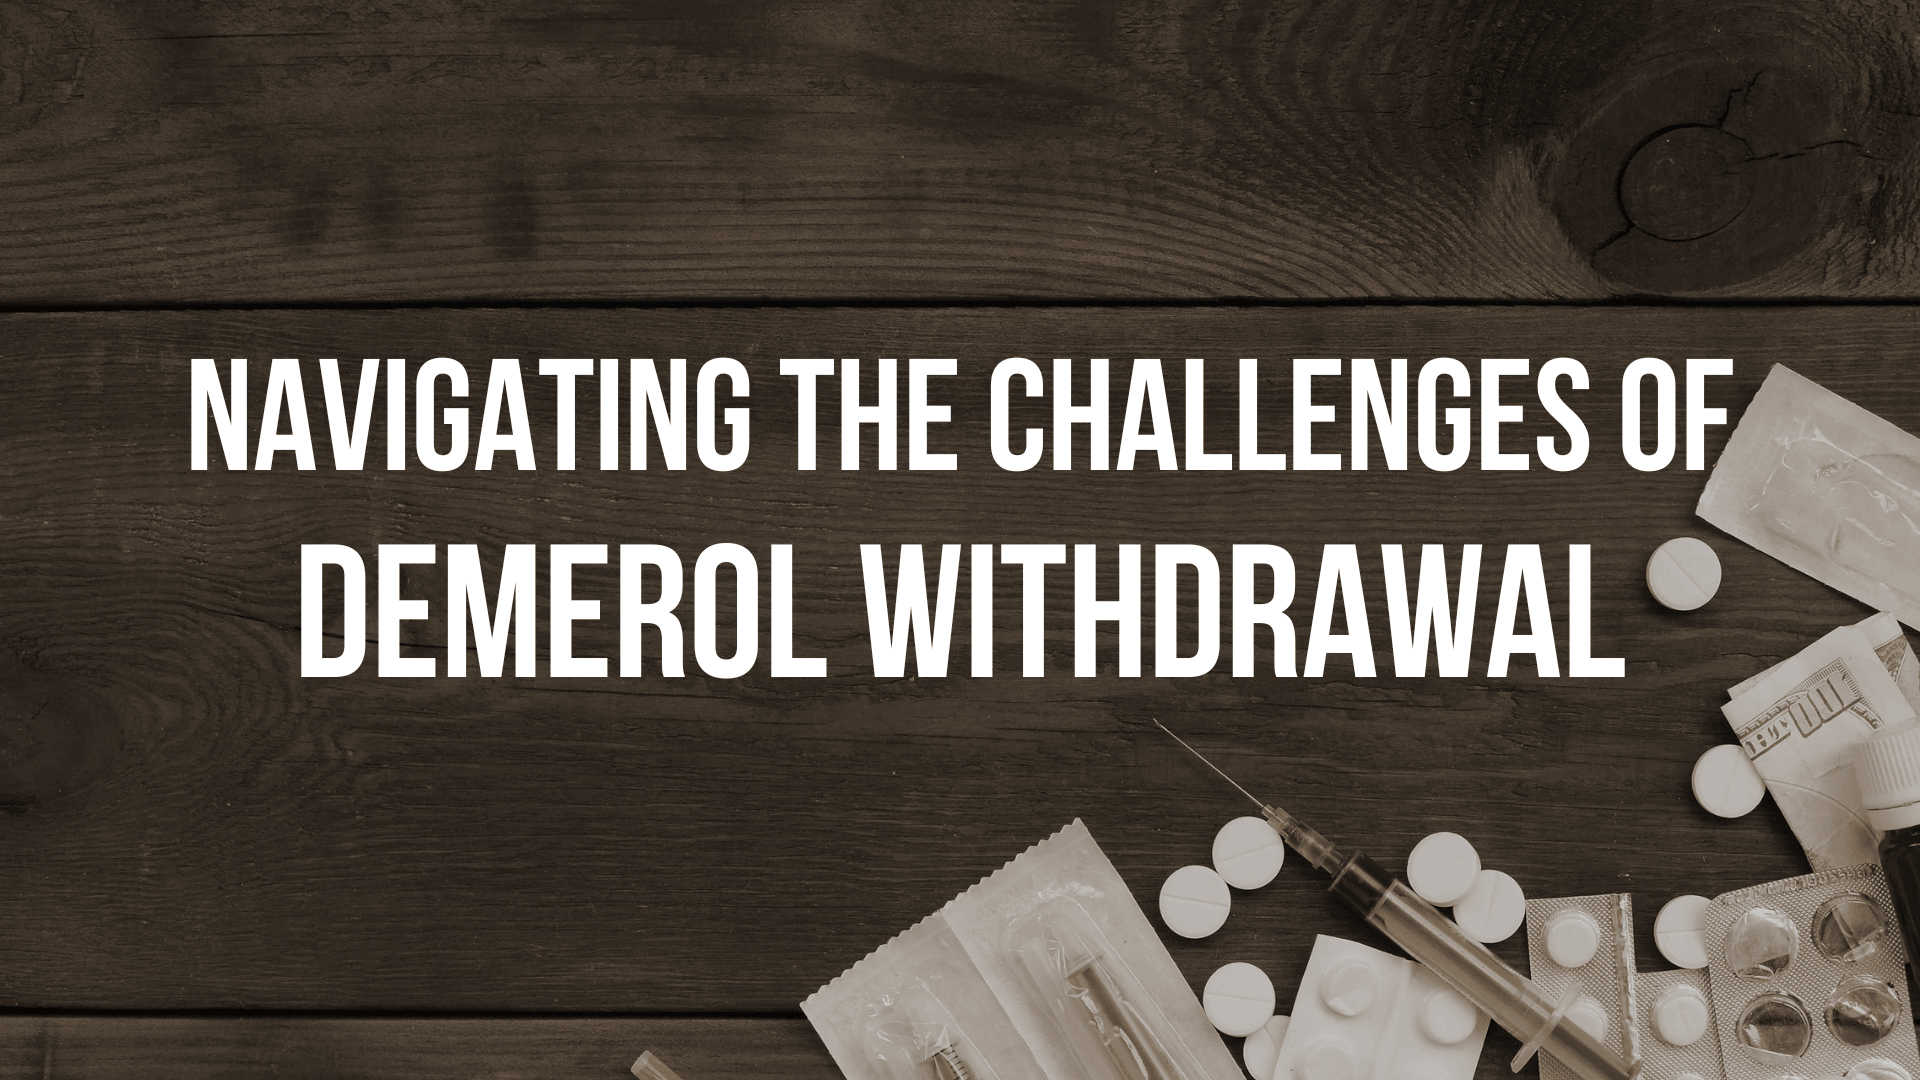 Navigating the Challenges of Demerol Withdrawal